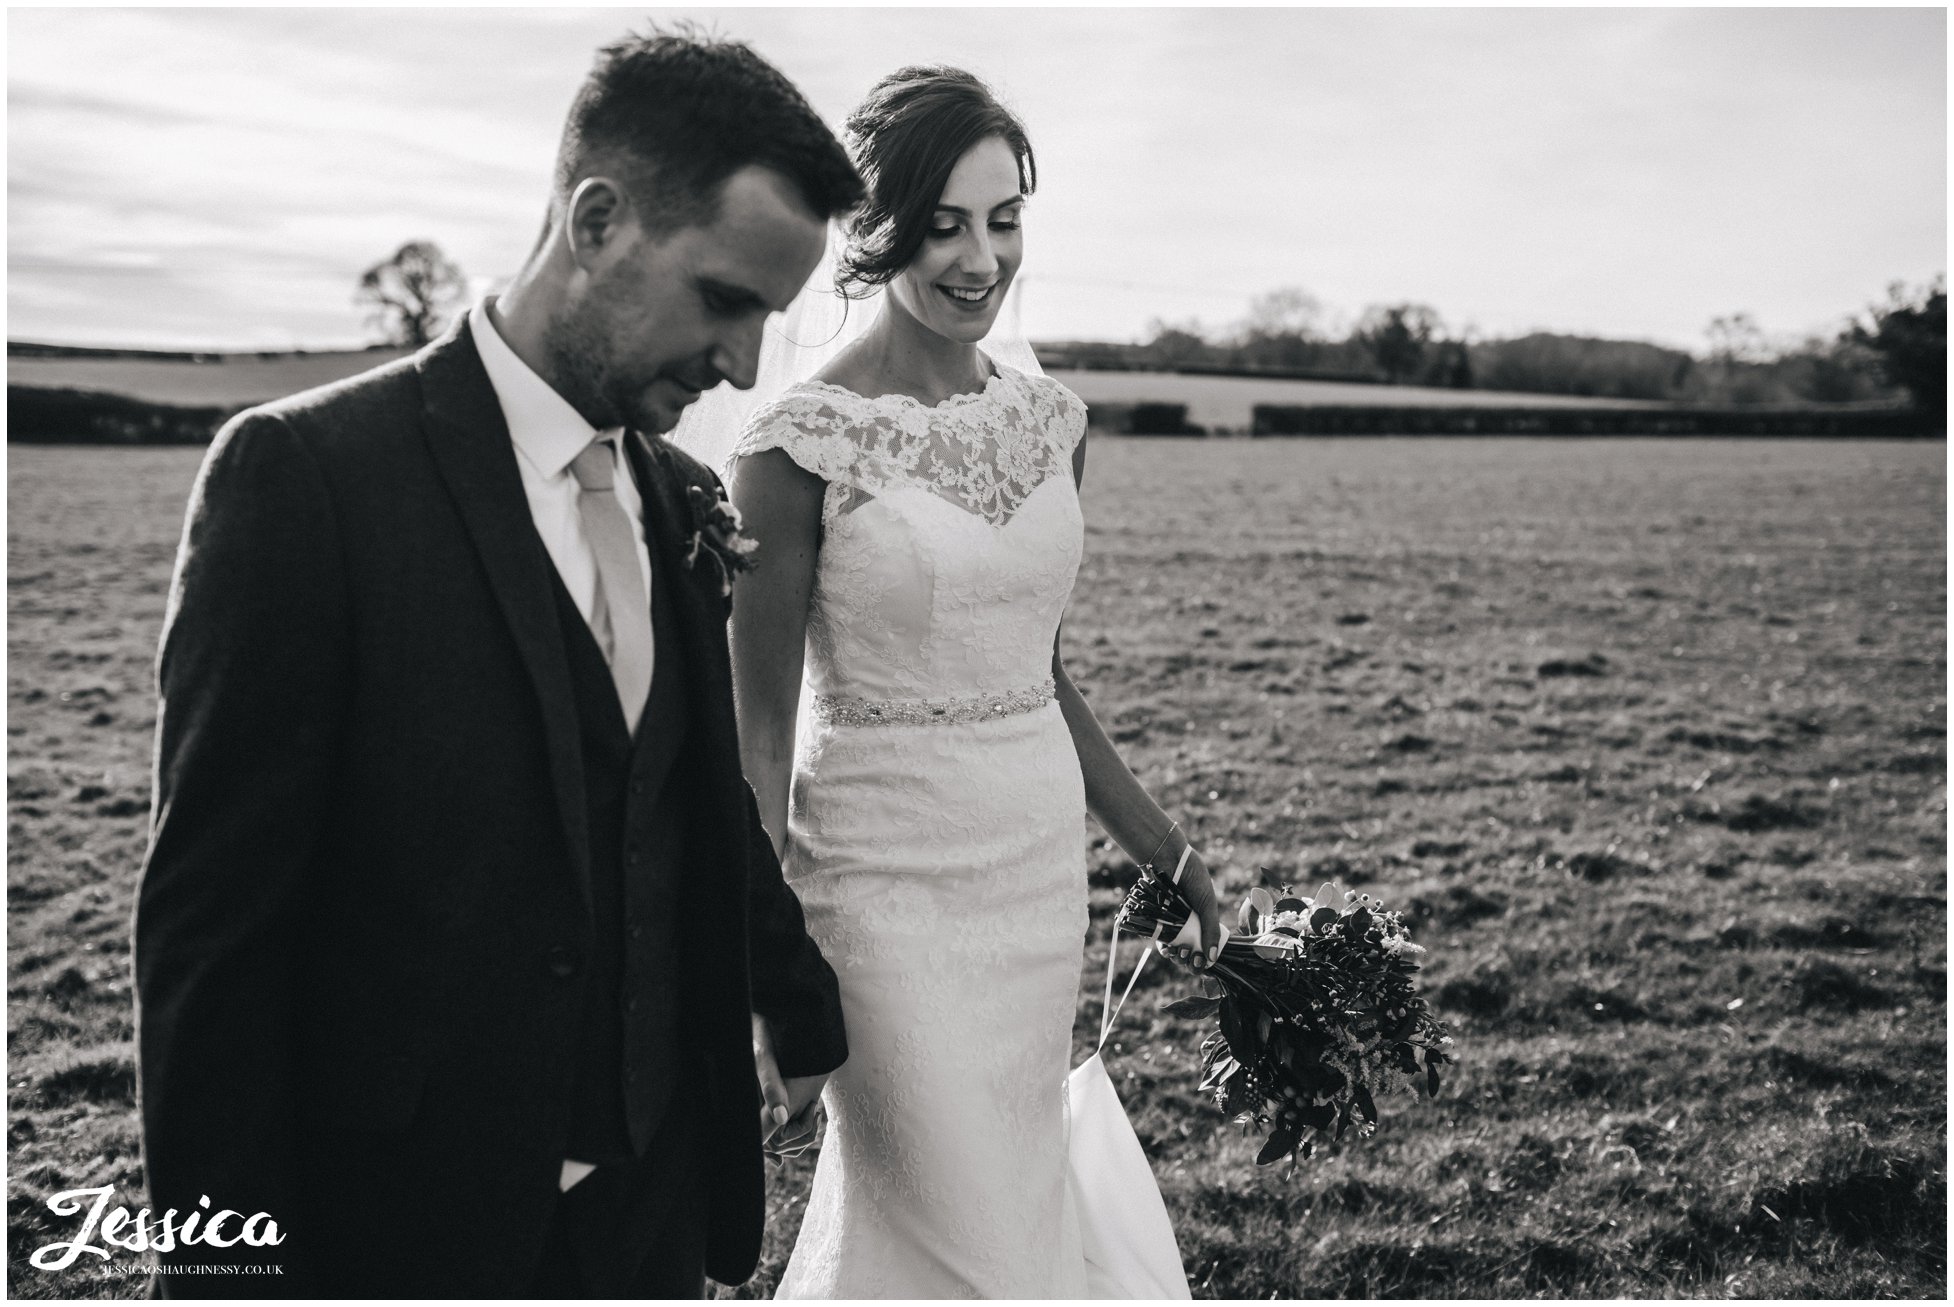 newly wed's wander through field in north wales - black and white